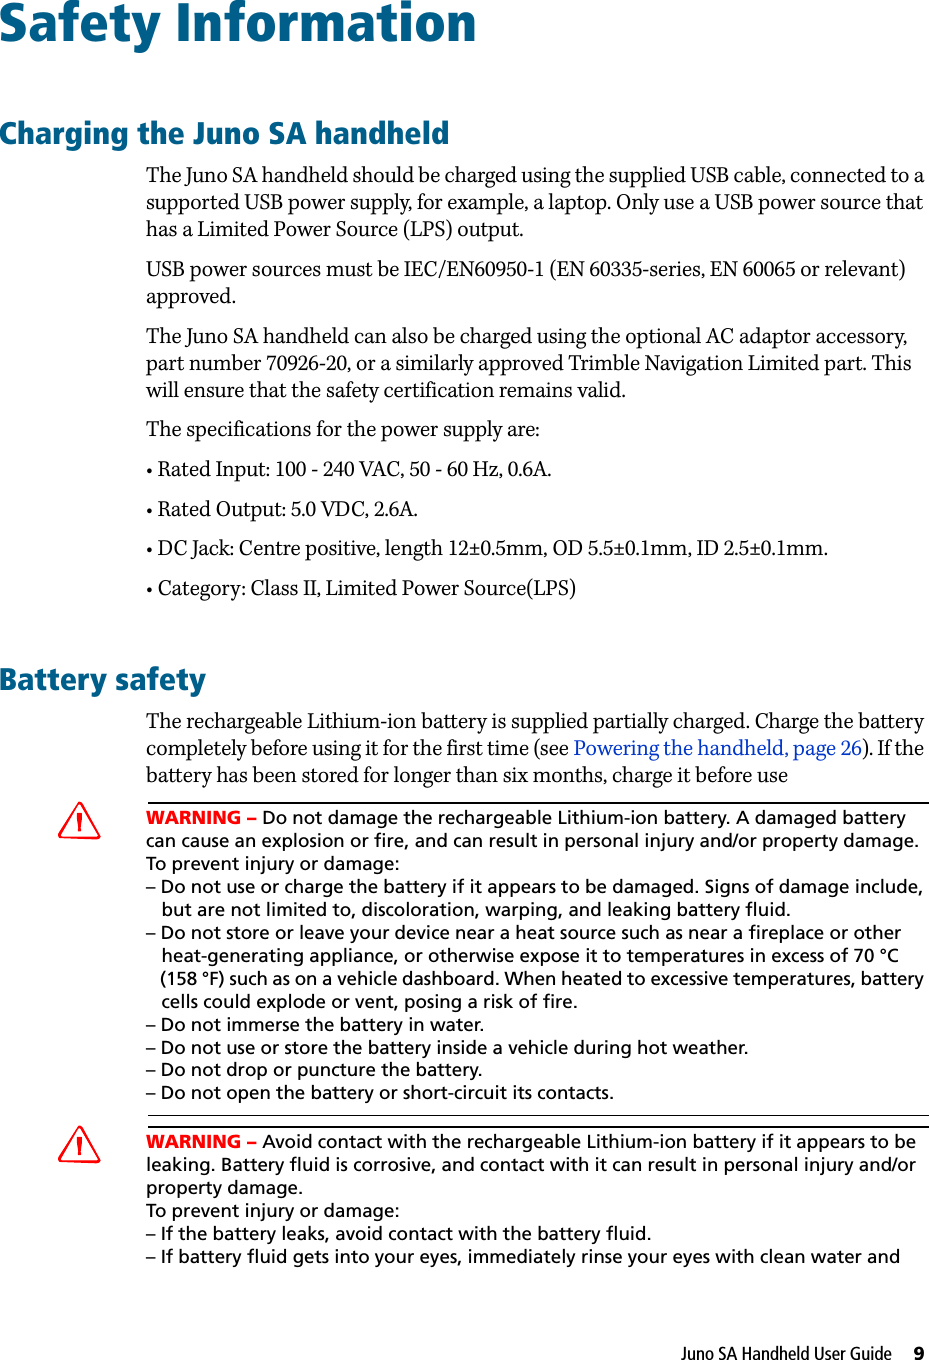 Juno SA Handheld User Guide     9Safety InformationCharging the Juno SA handheldThe Juno SA handheld should be charged using the supplied USB cable, connected to a supported USB power supply, for example, a laptop. Only use a USB power source that has a Limited Power Source (LPS) output.USB power sources must be IEC/EN60950-1 (EN 60335-series, EN 60065 or relevant) approved.The Juno SA handheld can also be charged using the optional AC adaptor accessory, part number 70926-20, or a similarly approved Trimble Navigation Limited part. This will ensure that the safety certification remains valid.The specifications for the power supply are:• Rated Input: 100 - 240 VAC, 50 - 60 Hz, 0.6A.• Rated Output: 5.0 VDC, 2.6A.• DC Jack: Centre positive, length 12±0.5mm, OD 5.5±0.1mm, ID 2.5±0.1mm.• Category: Class II, Limited Power Source(LPS)Battery safetyThe rechargeable Lithium-ion battery is supplied partially charged. Charge the battery completely before using it for the first time (see Powering the handheld, page 26). If the battery has been stored for longer than six months, charge it before useCWARNING – Do not damage the rechargeable Lithium-ion battery. A damaged battery can cause an explosion or fire, and can result in personal injury and/or property damage. To prevent injury or damage: – Do not use or charge the battery if it appears to be damaged. Signs of damage include,    but are not limited to, discoloration, warping, and leaking battery fluid.– Do not store or leave your device near a heat source such as near a fireplace or other    heat-generating appliance, or otherwise expose it to temperatures in excess of 70 °C    (158 °F) such as on a vehicle dashboard. When heated to excessive temperatures, battery    cells could explode or vent, posing a risk of fire. – Do not immerse the battery in water. – Do not use or store the battery inside a vehicle during hot weather. – Do not drop or puncture the battery. – Do not open the battery or short-circuit its contacts.CWARNING – Avoid contact with the rechargeable Lithium-ion battery if it appears to be leaking. Battery fluid is corrosive, and contact with it can result in personal injury and/or property damage.To prevent injury or damage:– If the battery leaks, avoid contact with the battery fluid. – If battery fluid gets into your eyes, immediately rinse your eyes with clean water and 